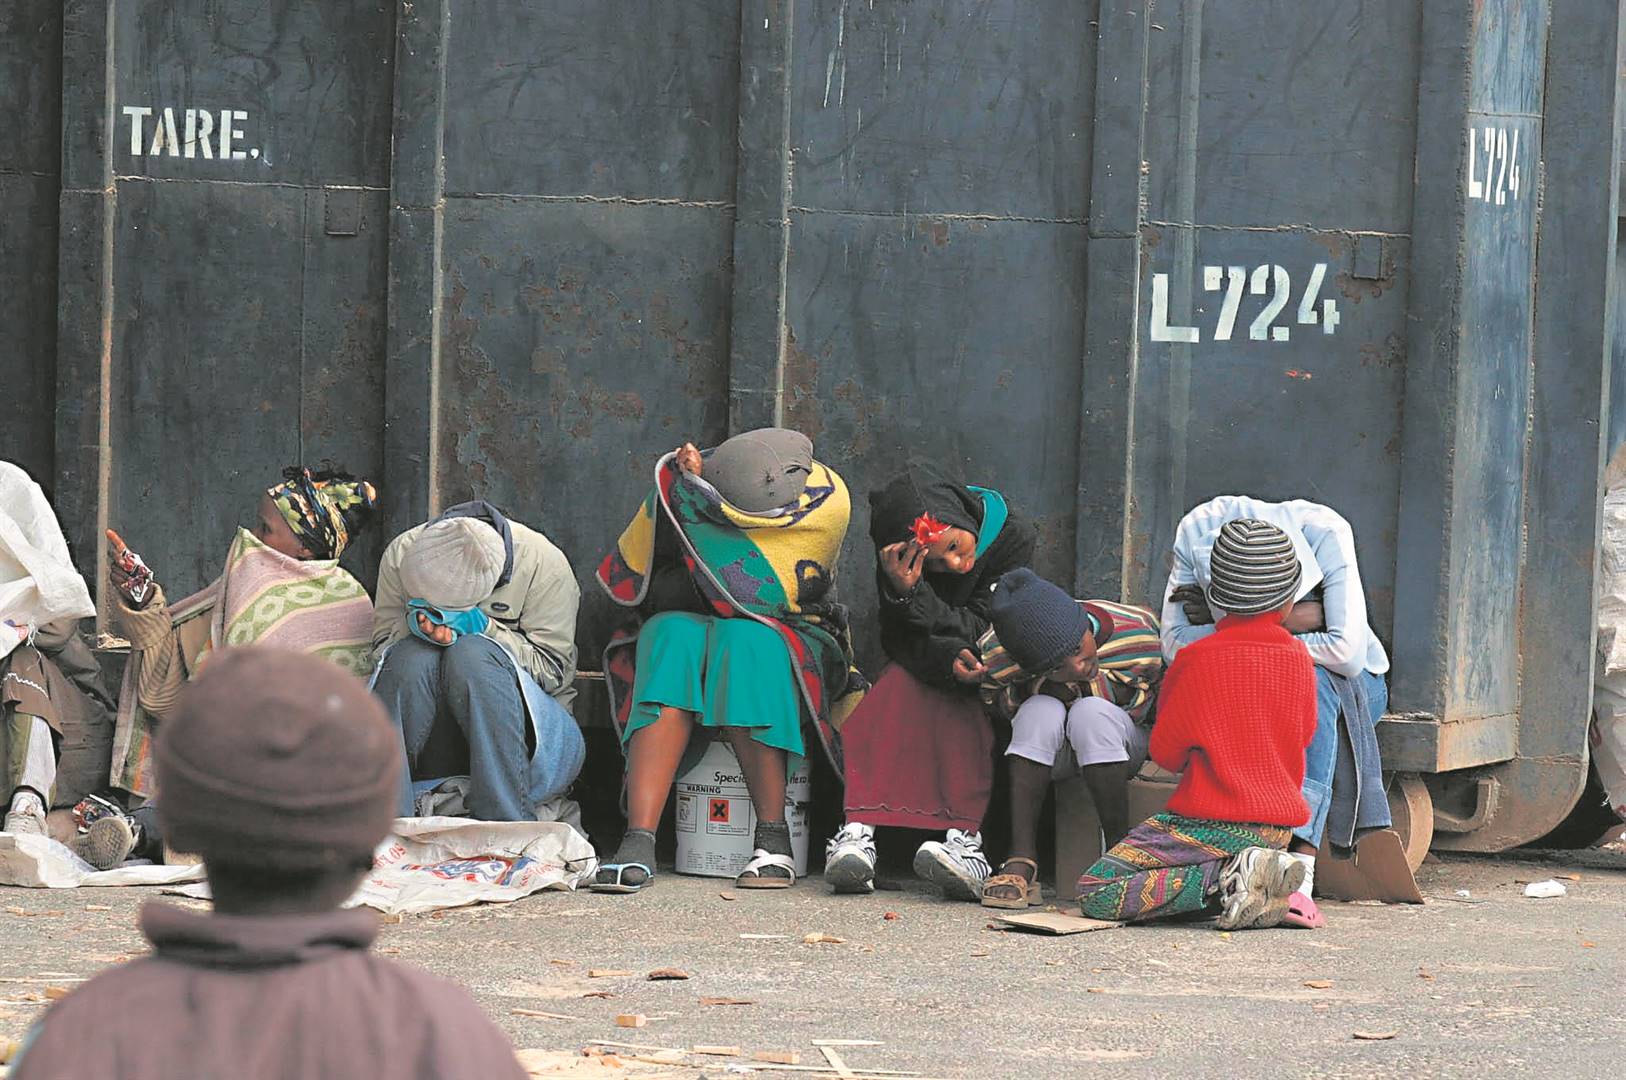 Unemployed people in the streets of Gauteng. Photo: Archive